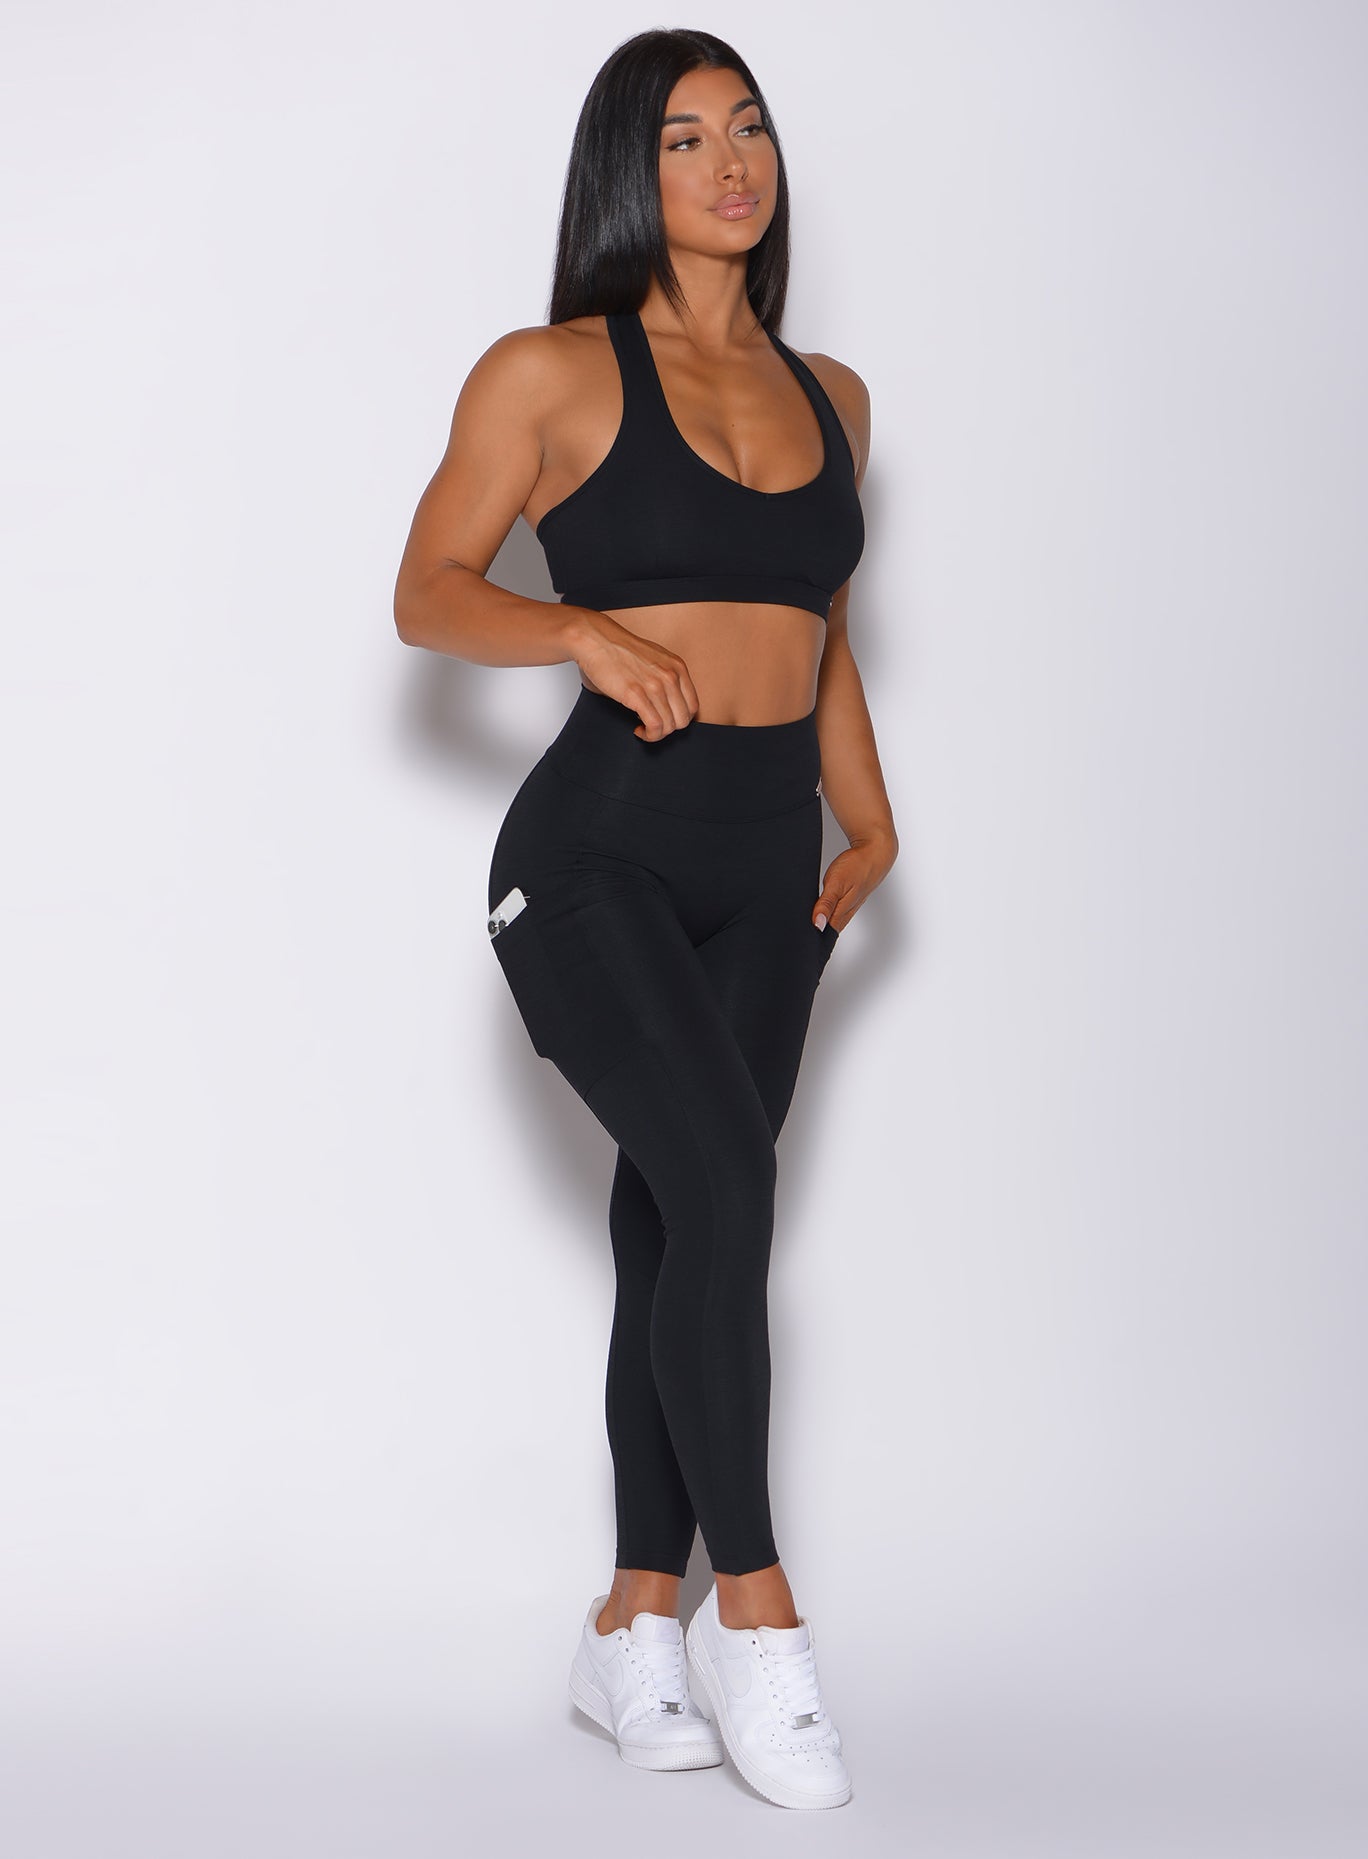 Right side profile view of a model in our black pocket rib leggings and a matching bra